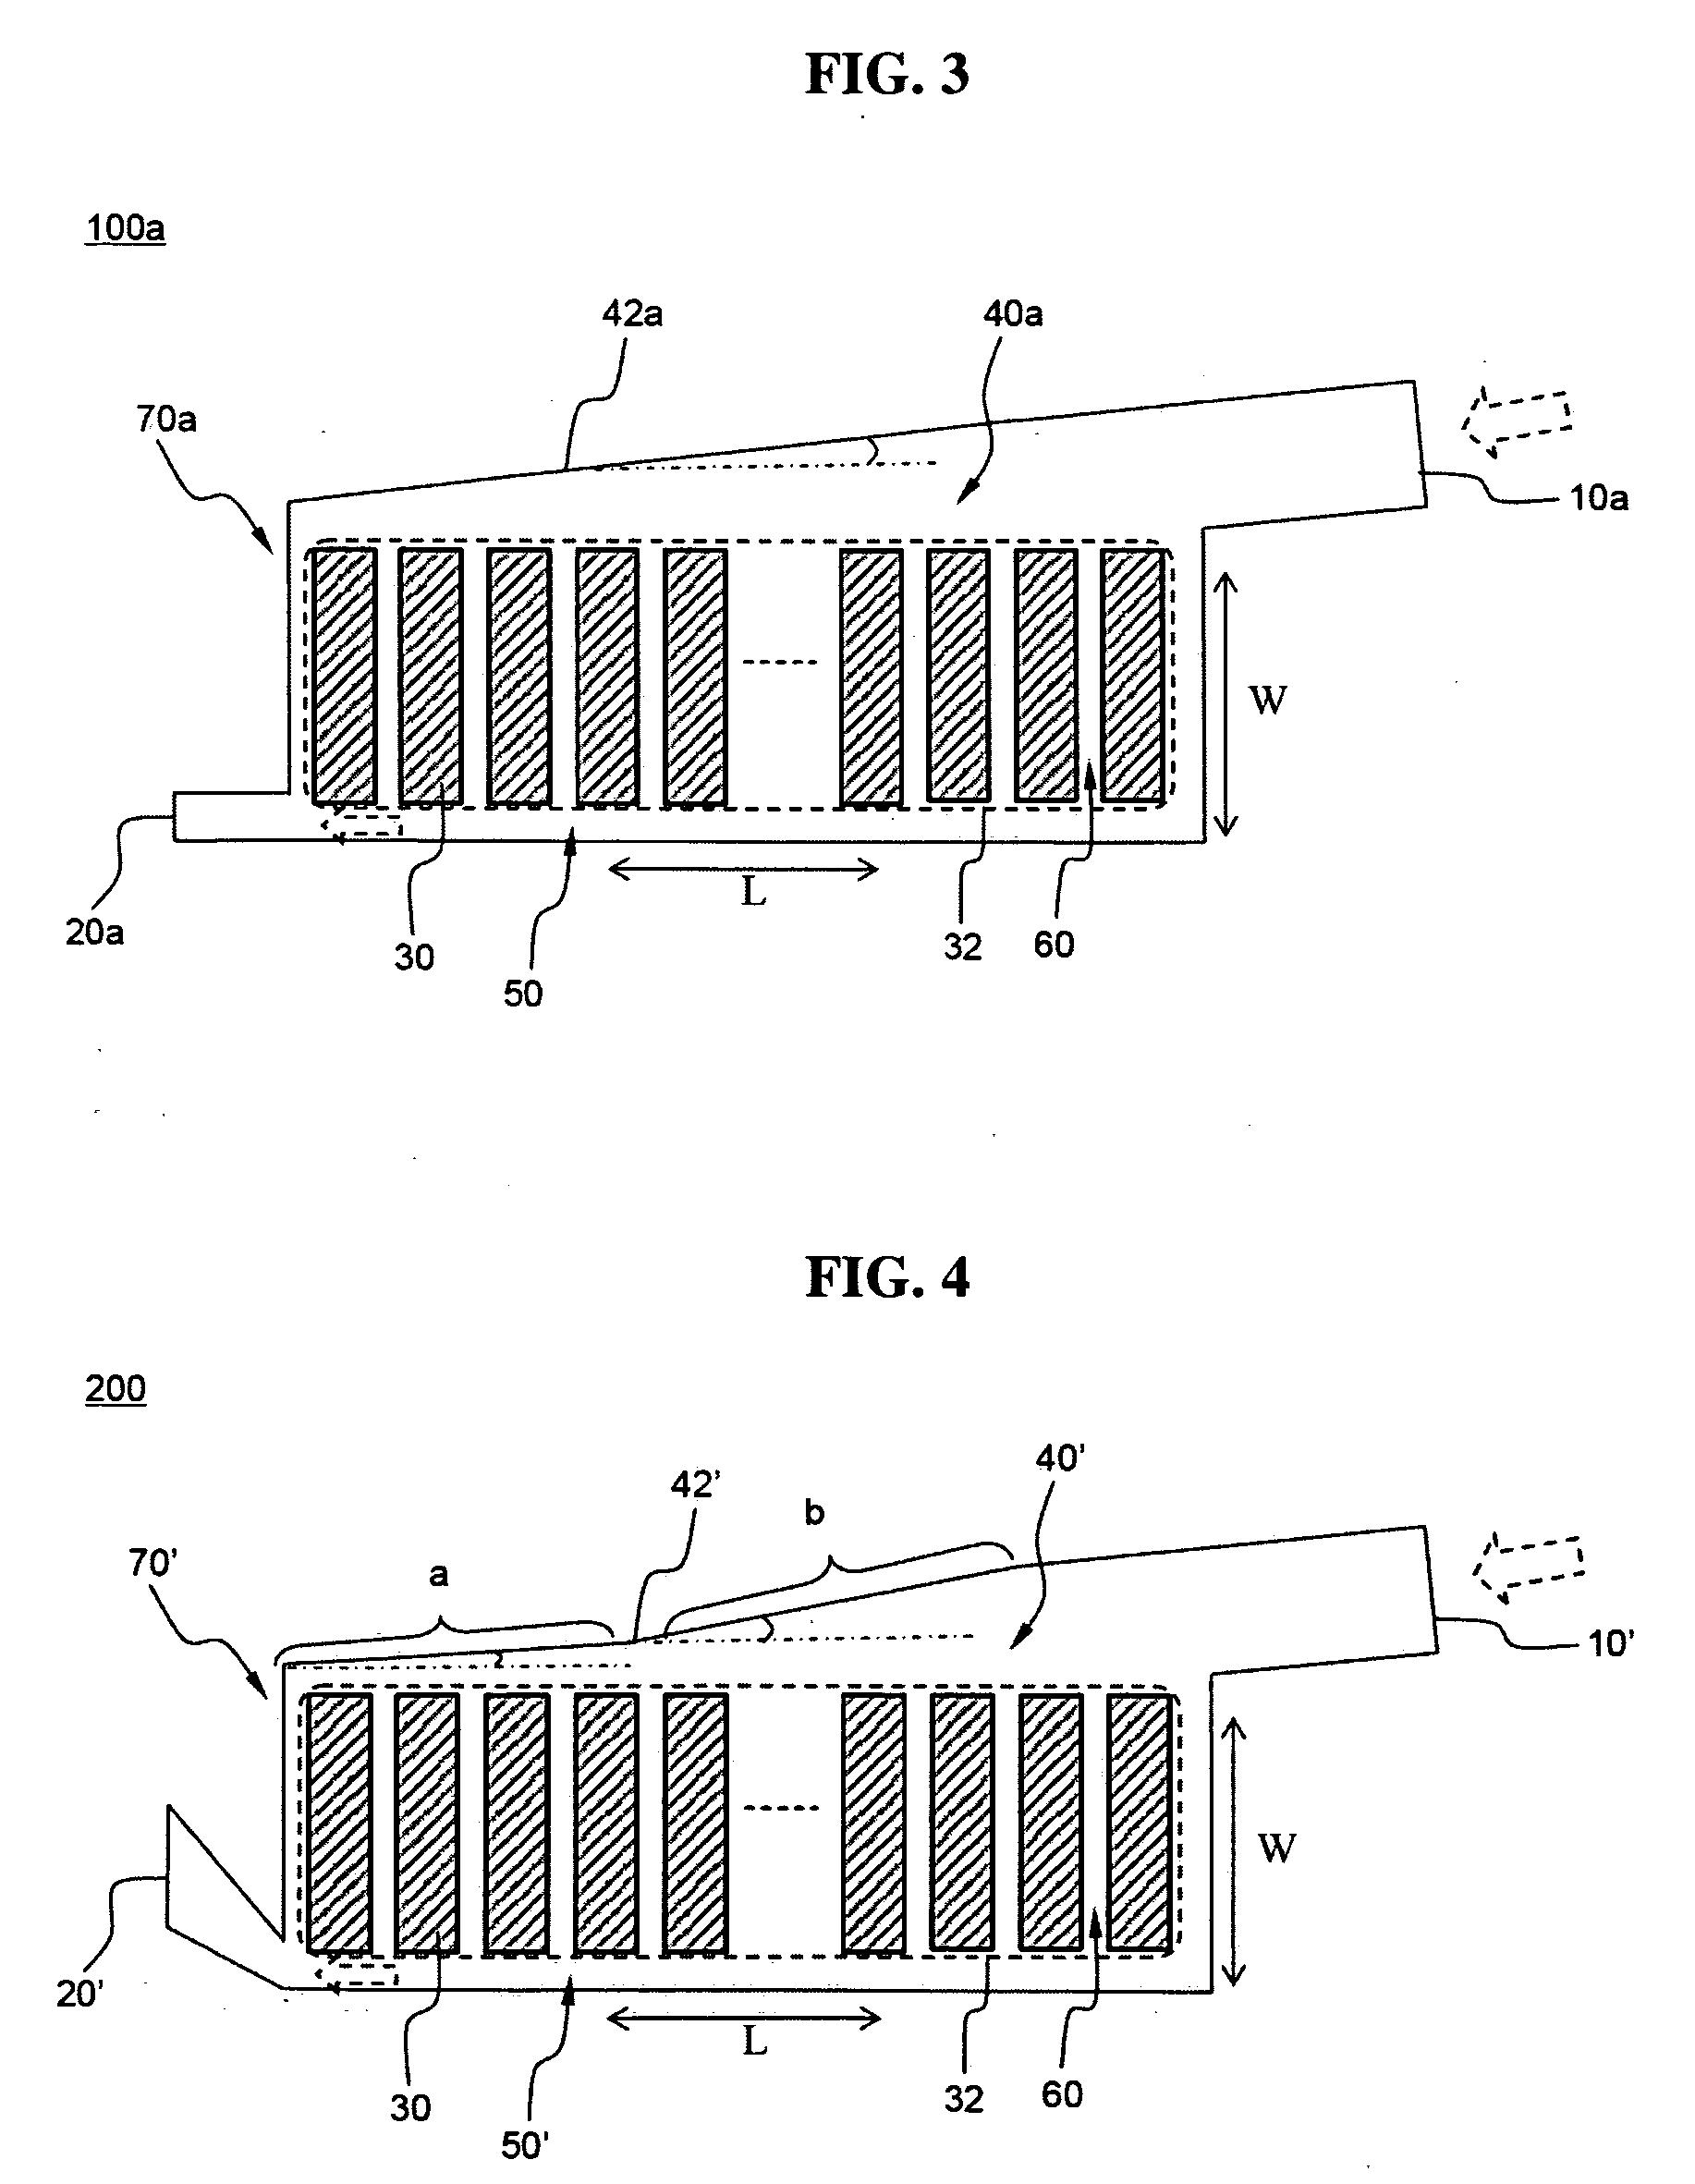 Middle- or large-sized battery pack case providing improved distribution uniformity in coolant flux